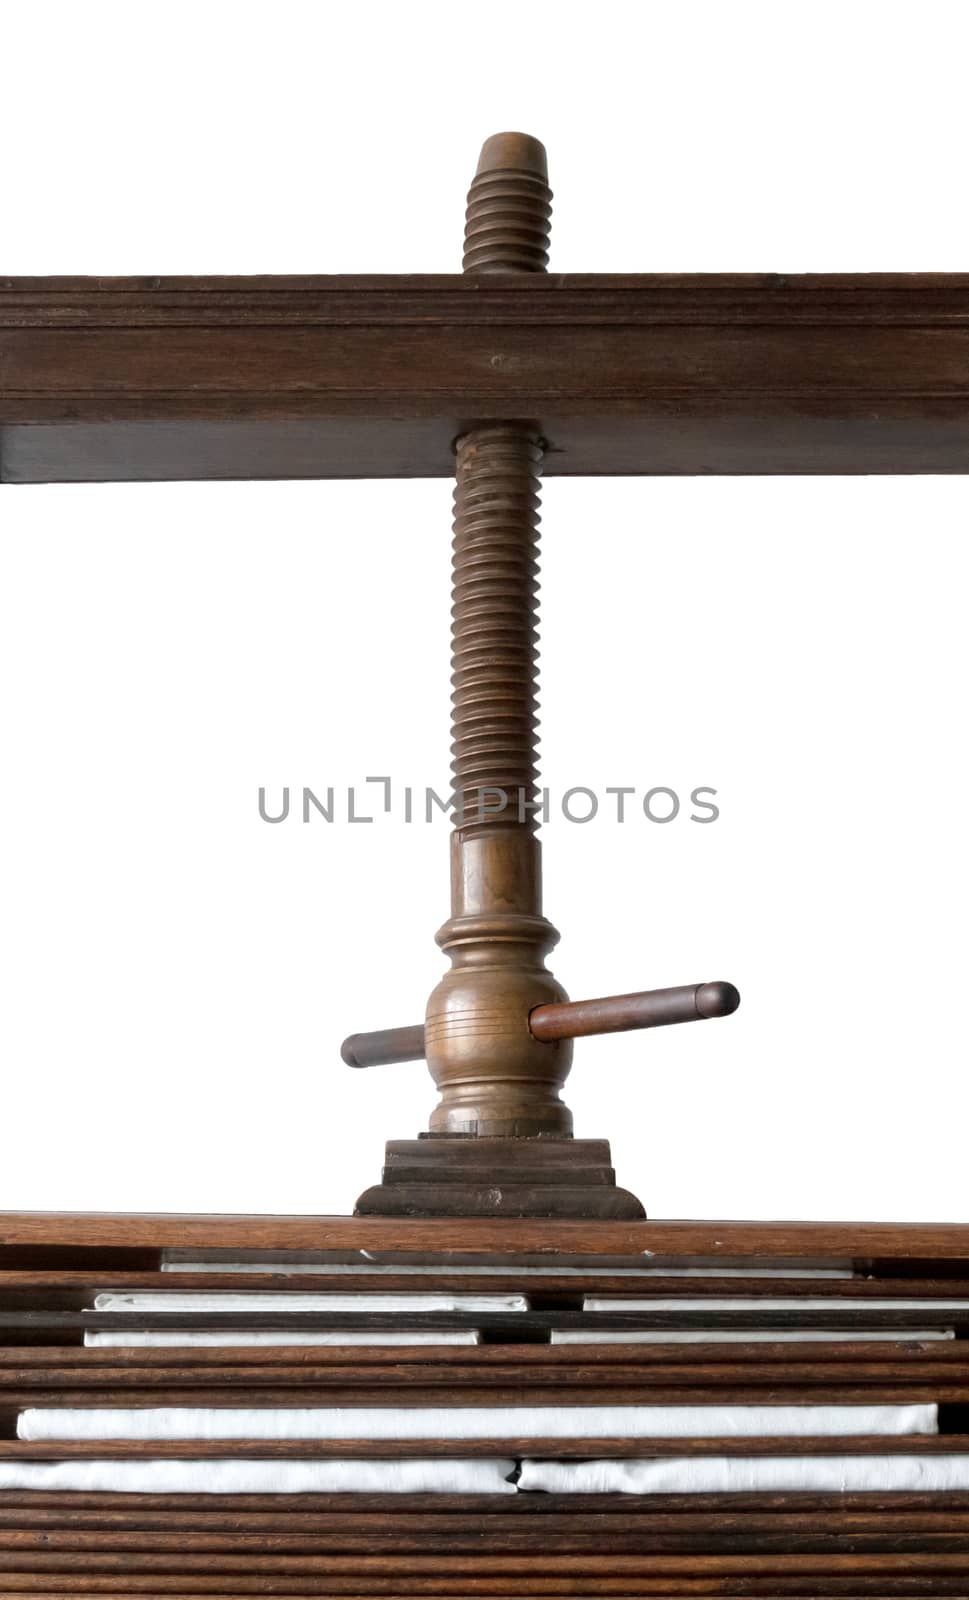 Antique wooden clothes wringer, isolated on white